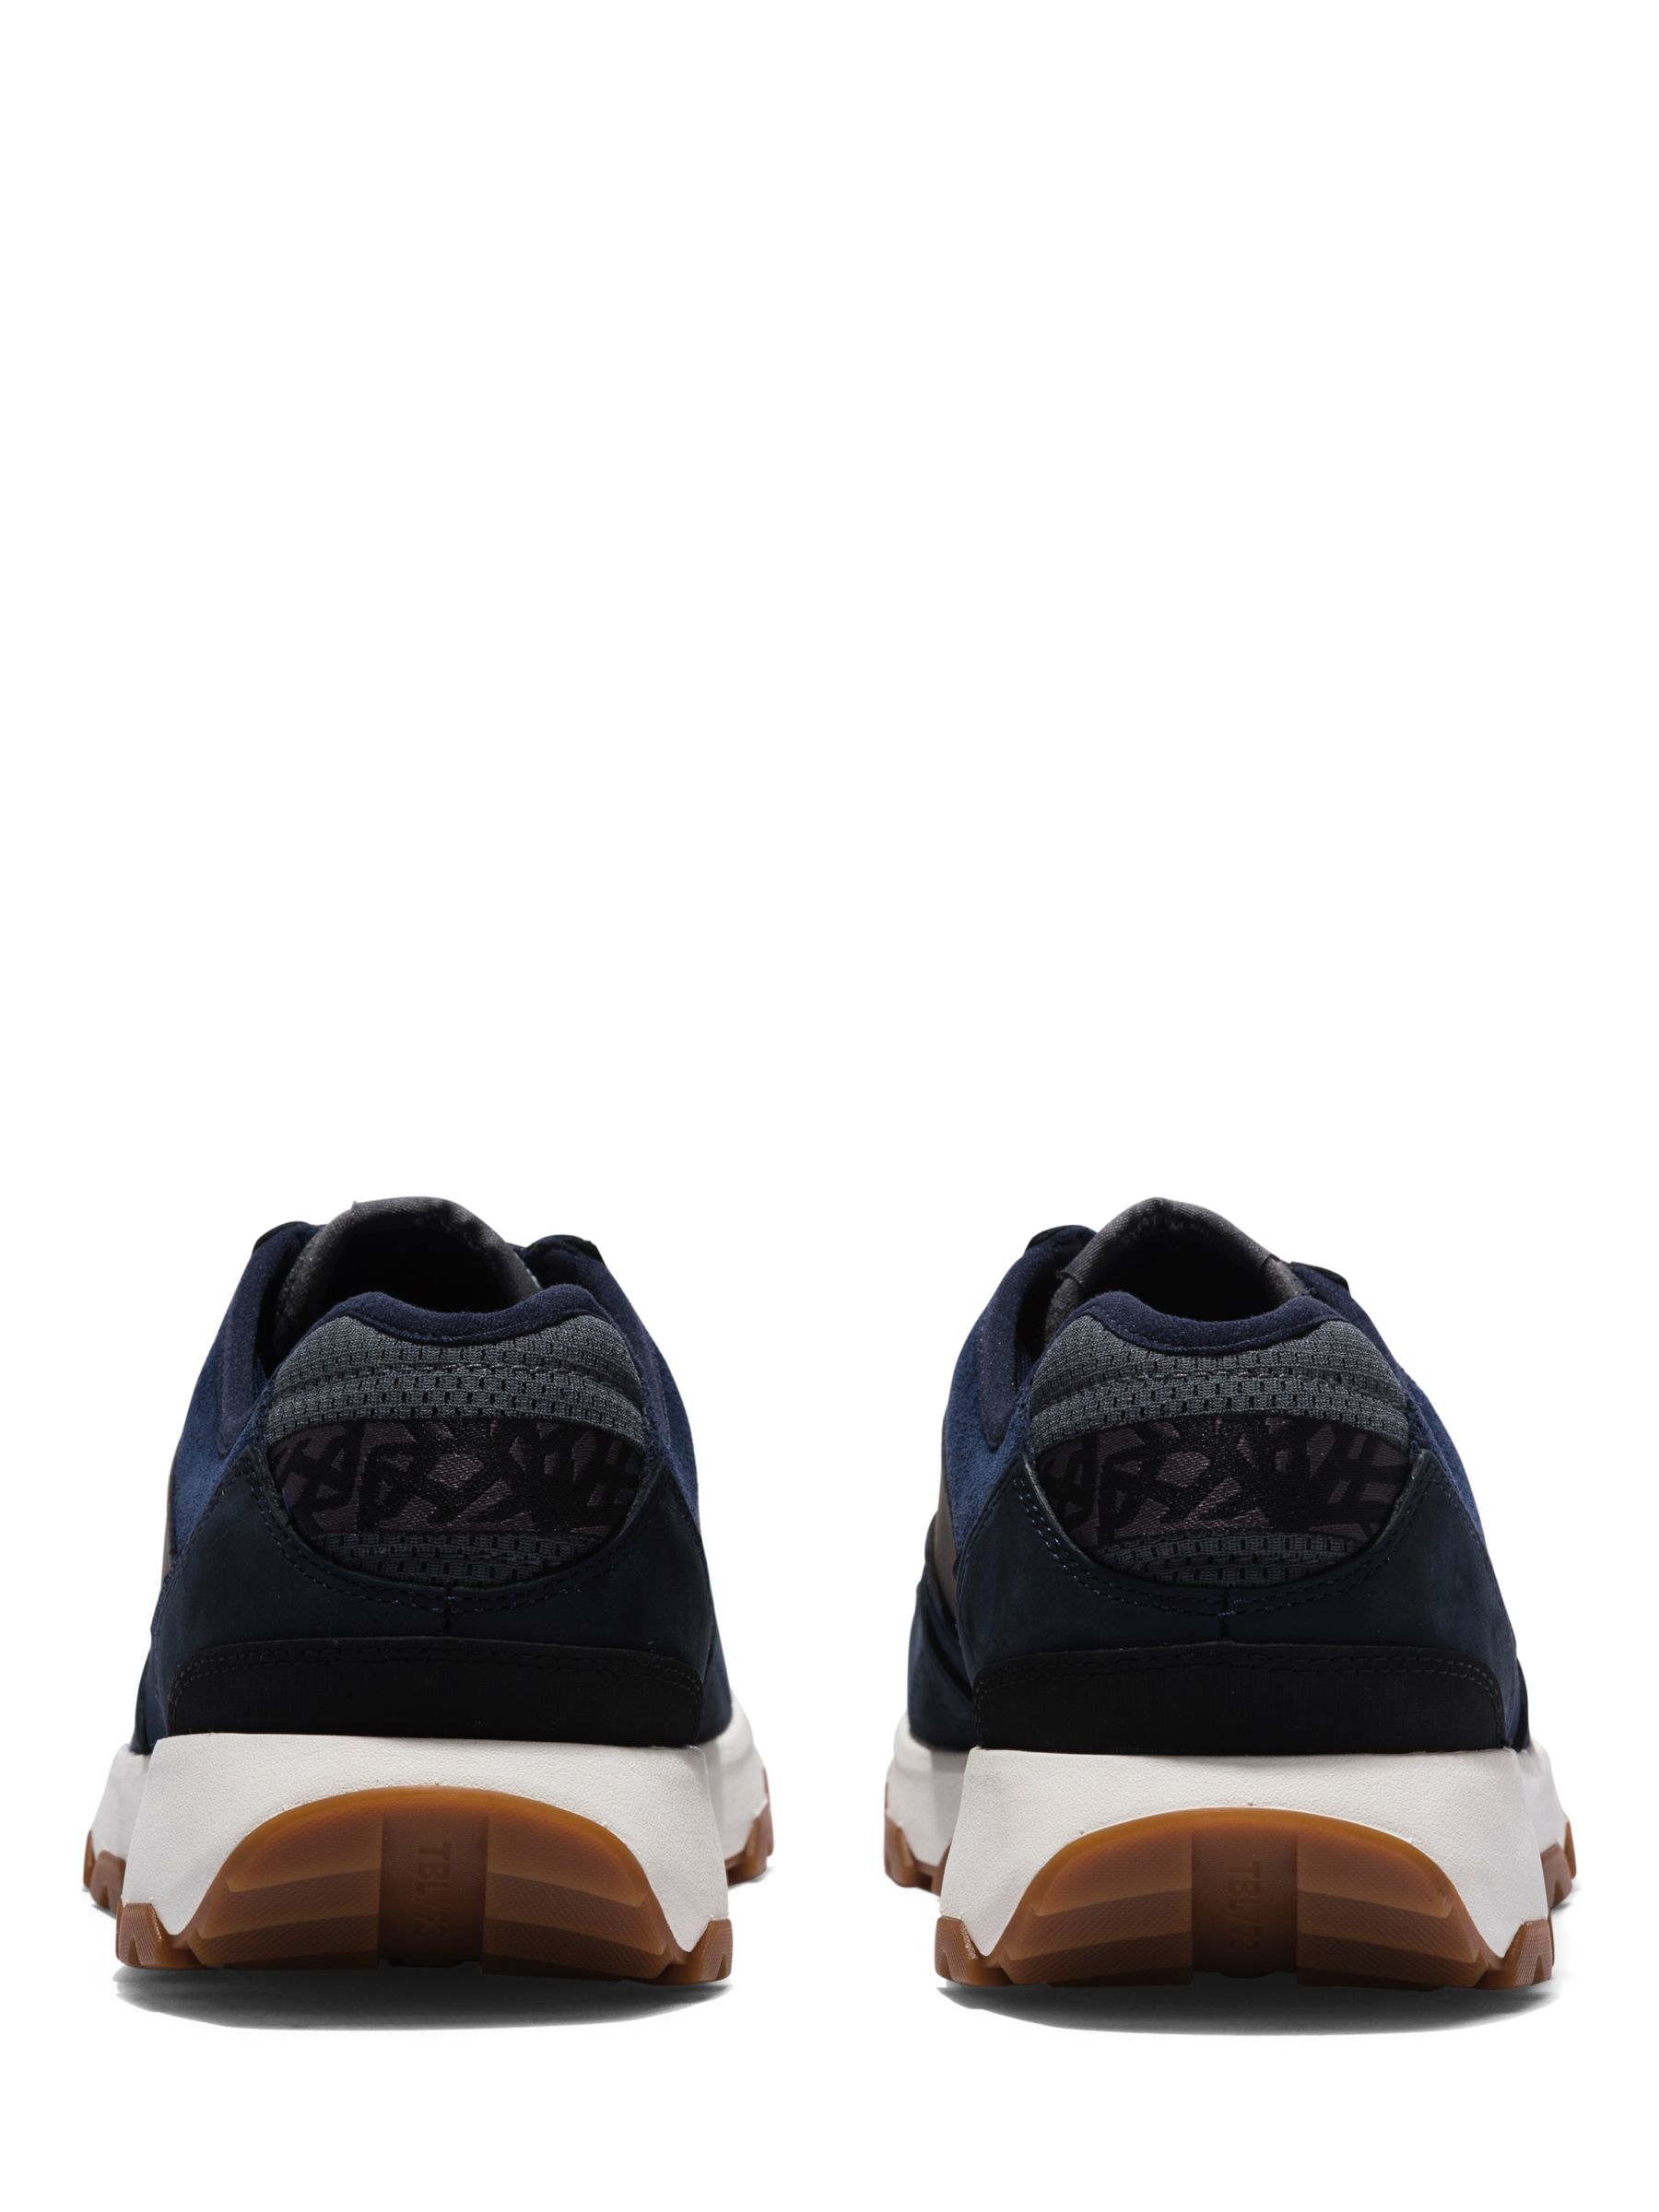 Timberland Windsor Park Suede Trainers, Navy, 7